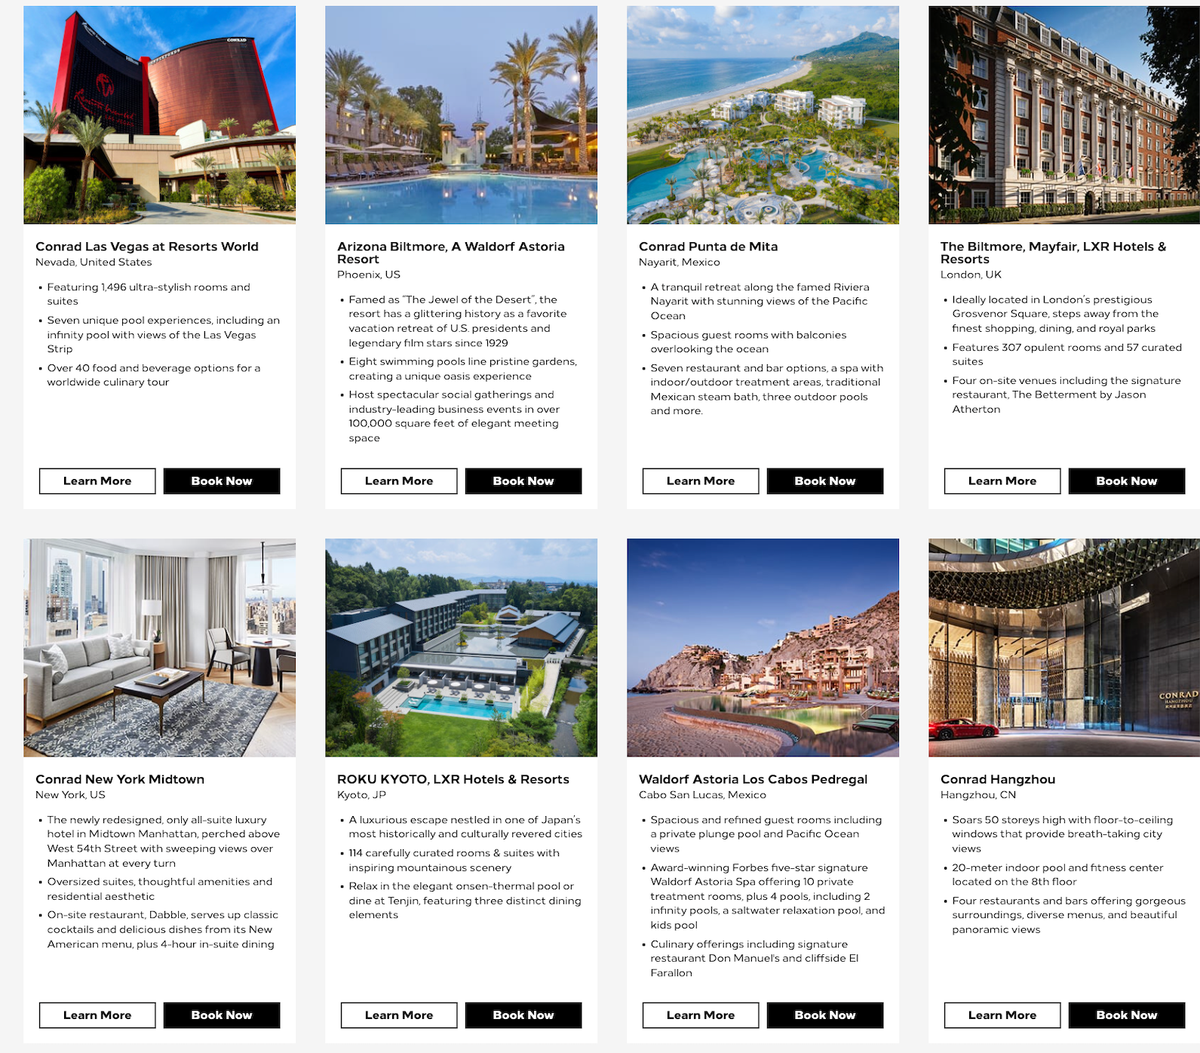 Hilton's highend properties offering fourth night free promotion The